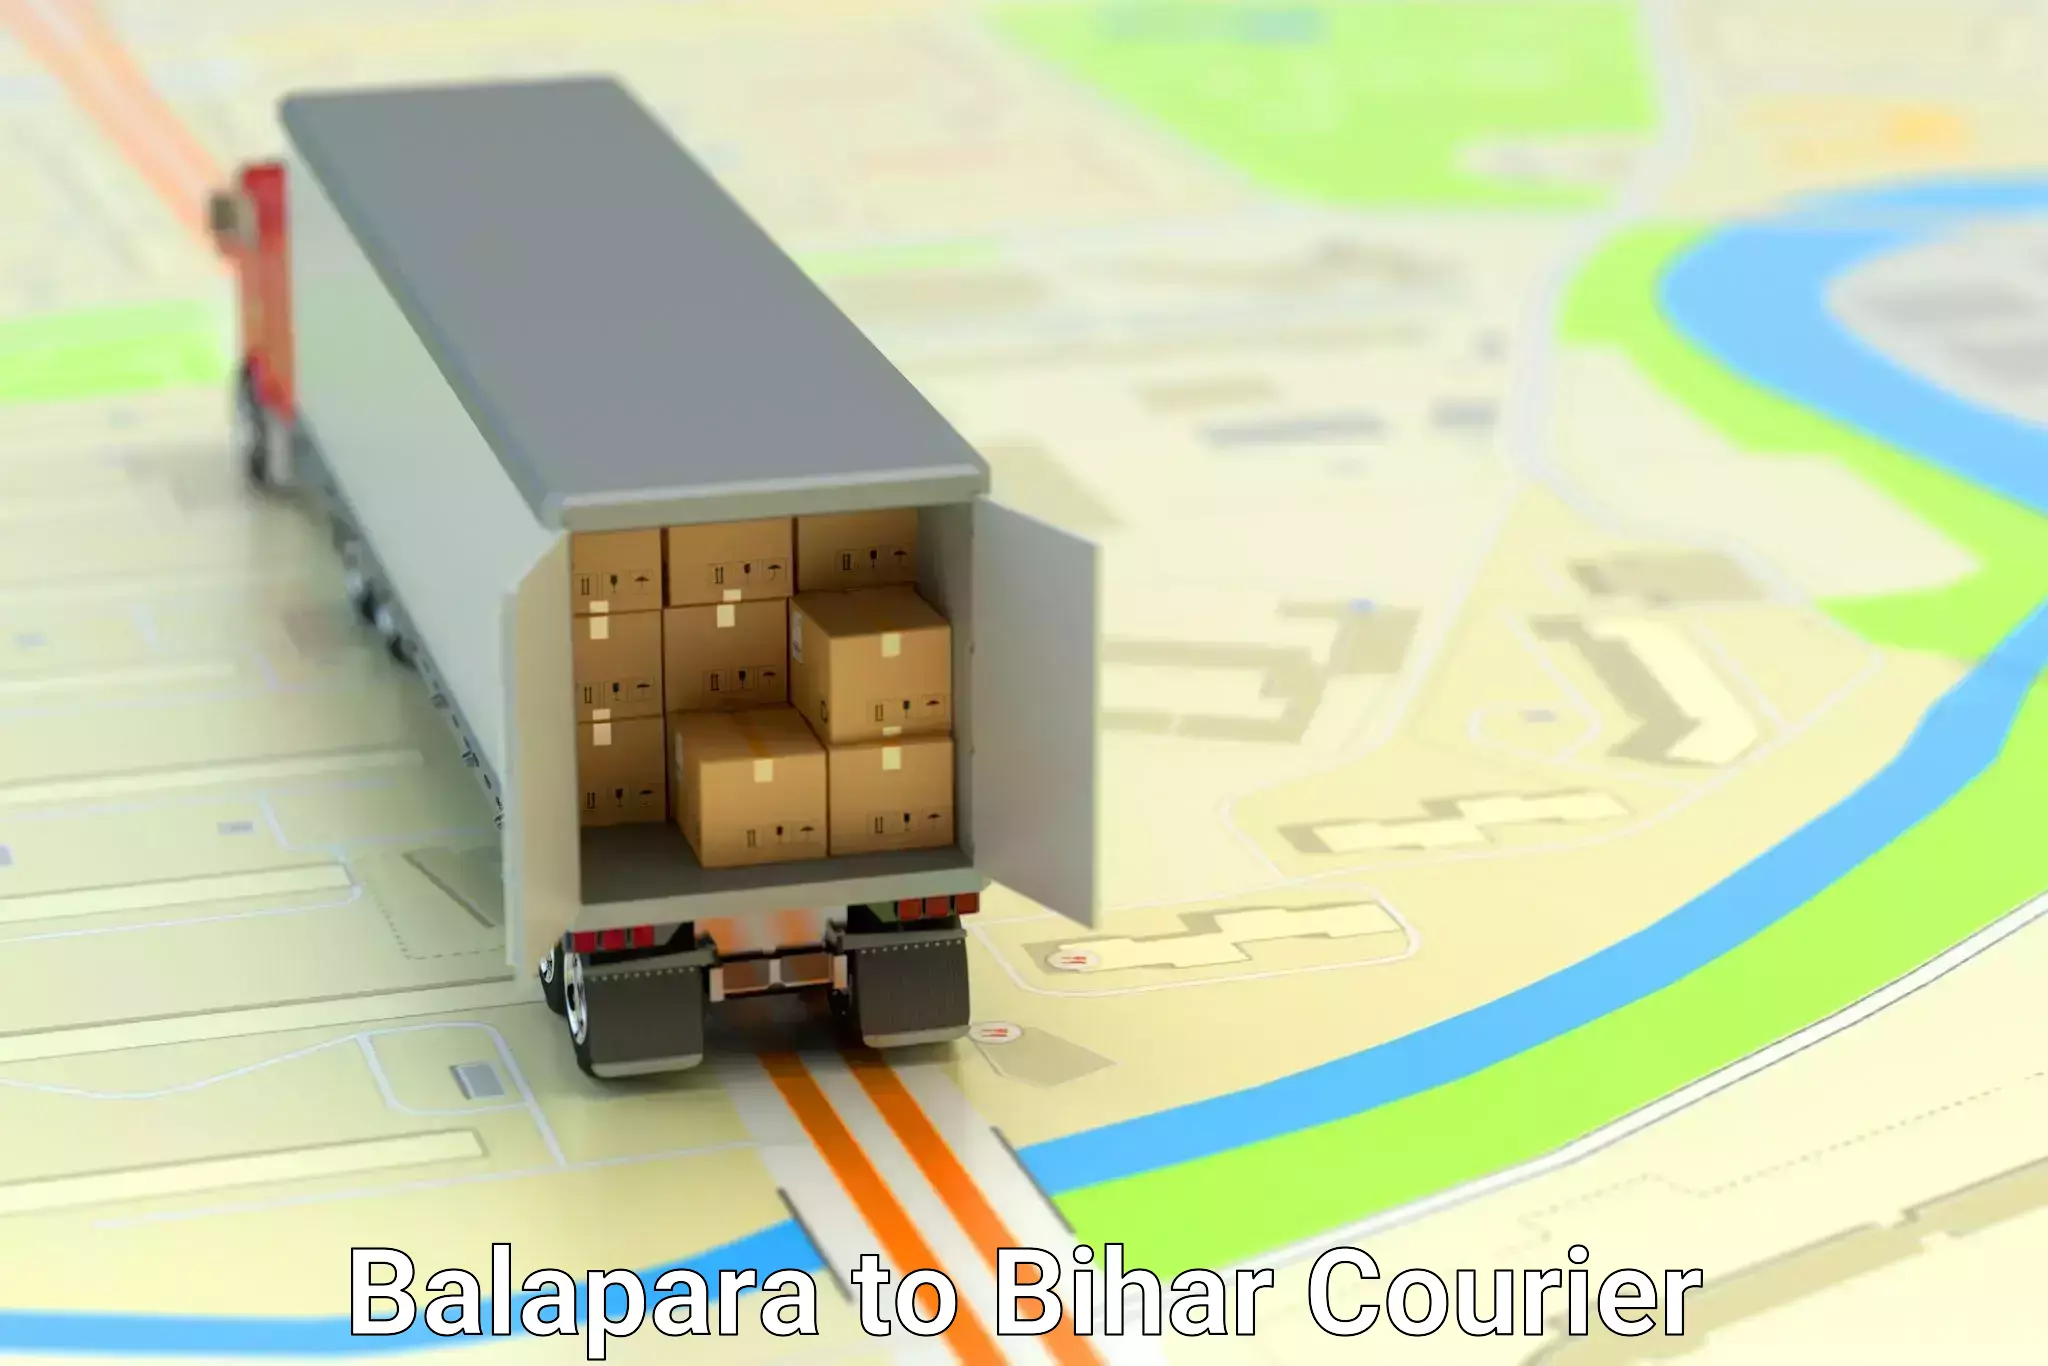 Package delivery network Balapara to Manjhaul